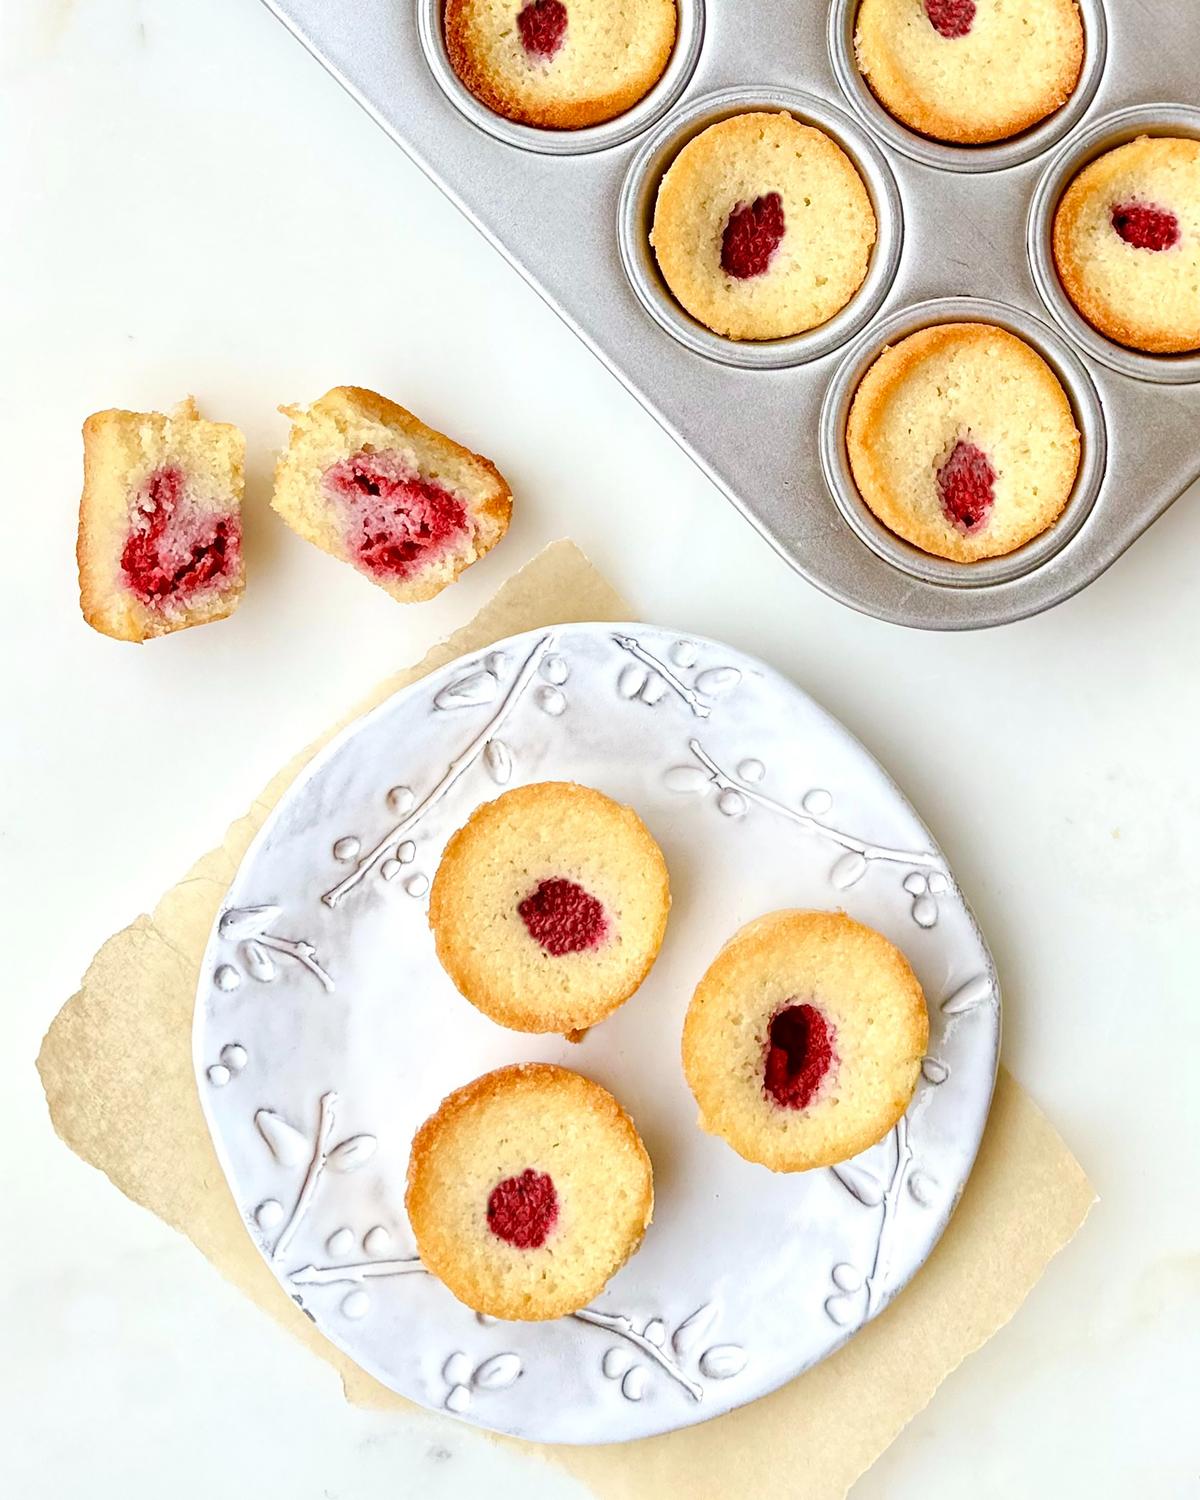 French financiers are named for the small rectangular molds in which they are traditionally baked, which creates a gold-tinged cake resembling an ingot. (Lynda Balslev for Tastefood)